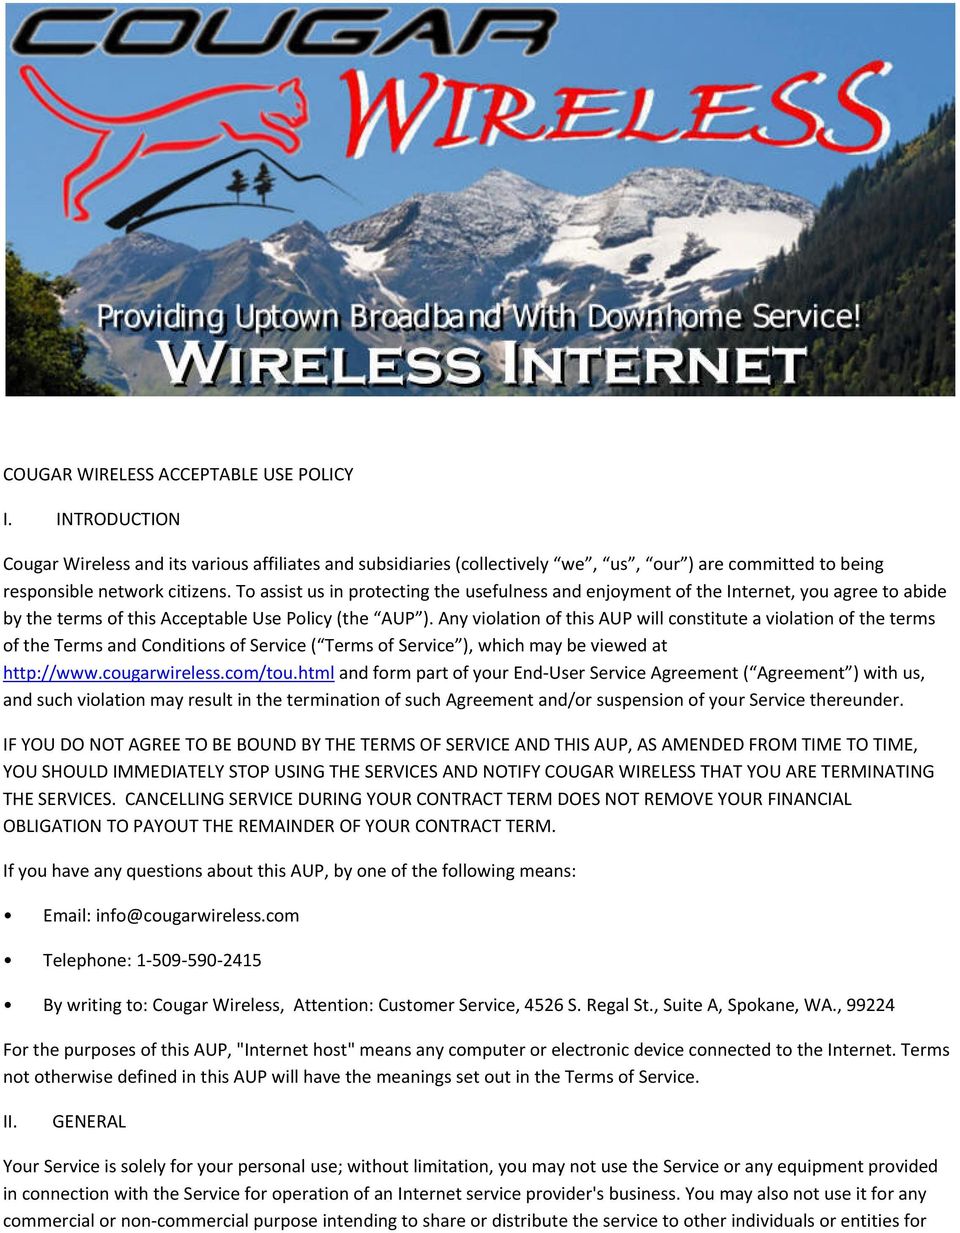 Any violation of this AUP will constitute a violation of the terms of the Terms and Conditions of Service ( Terms of Service ), which may be viewed at http://www.cougarwireless.com/tou.